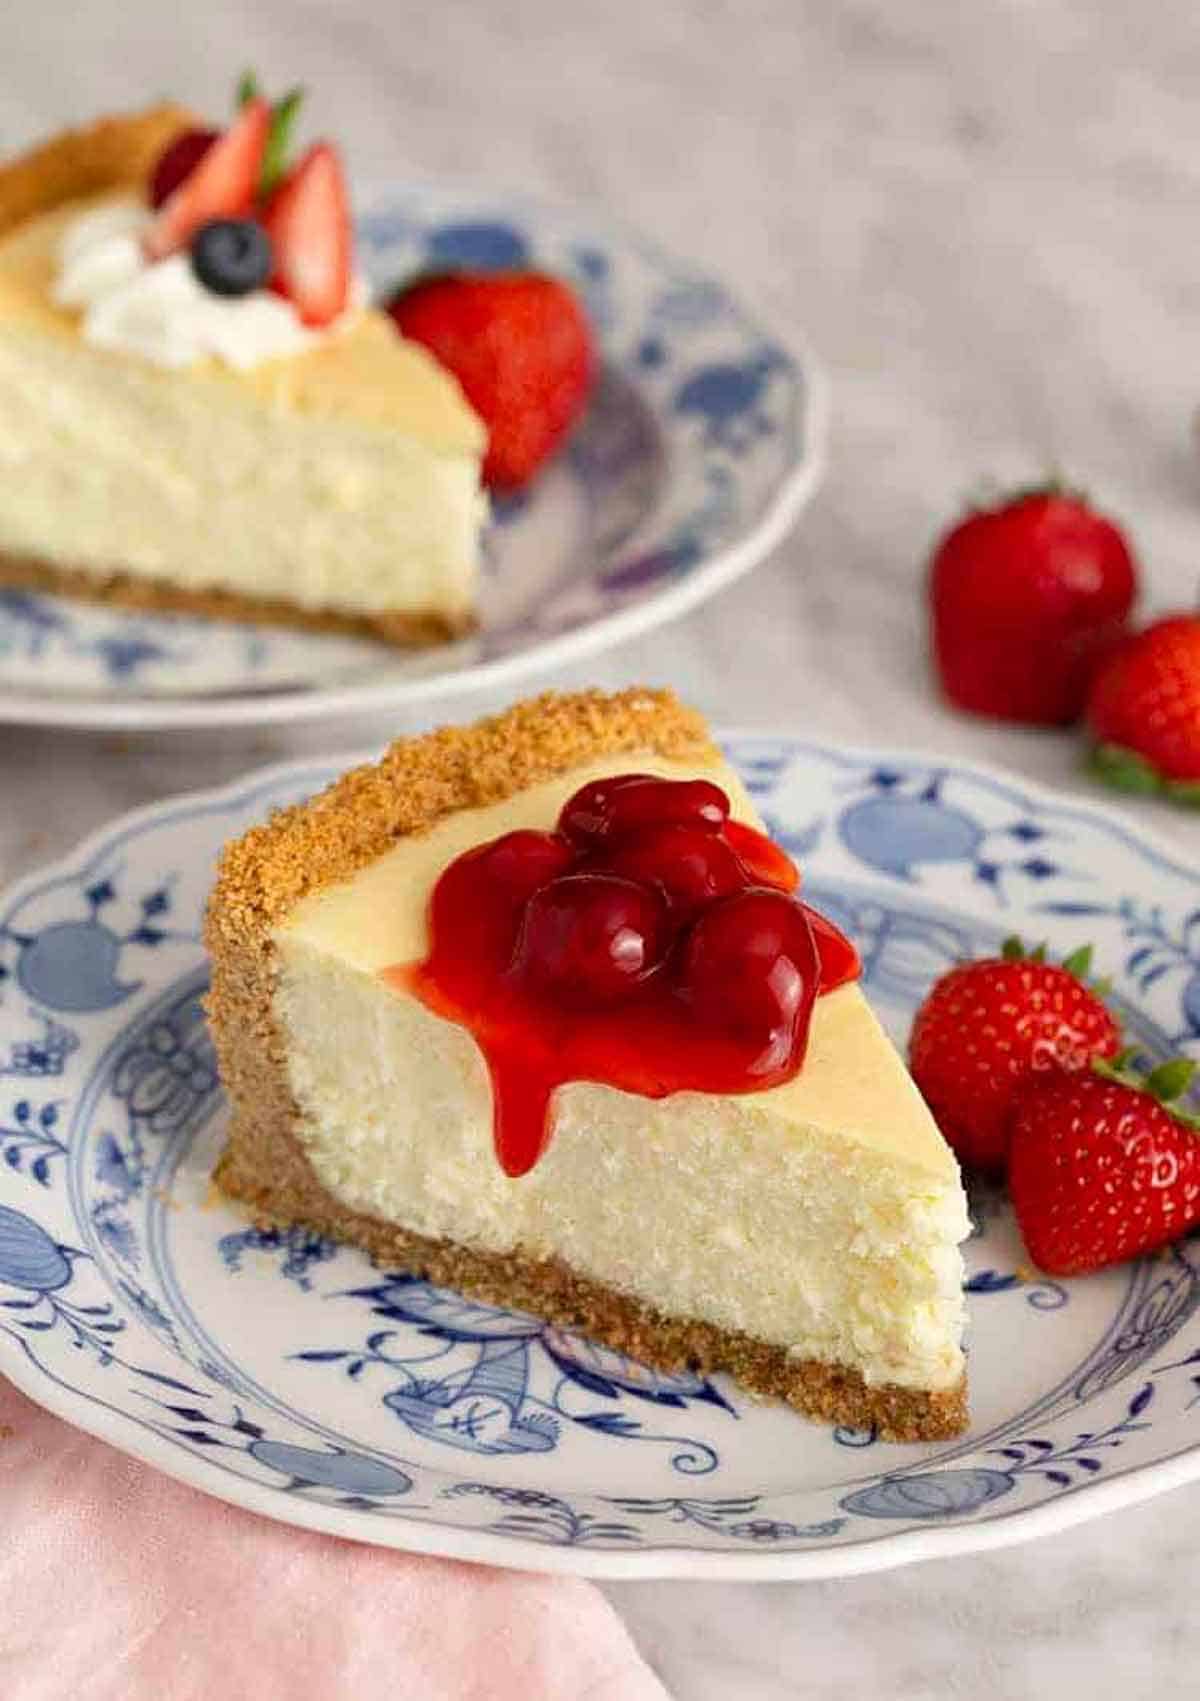 A slice of cheesecake with berry sauce on top with another slice in the background and strawberries scattered around.